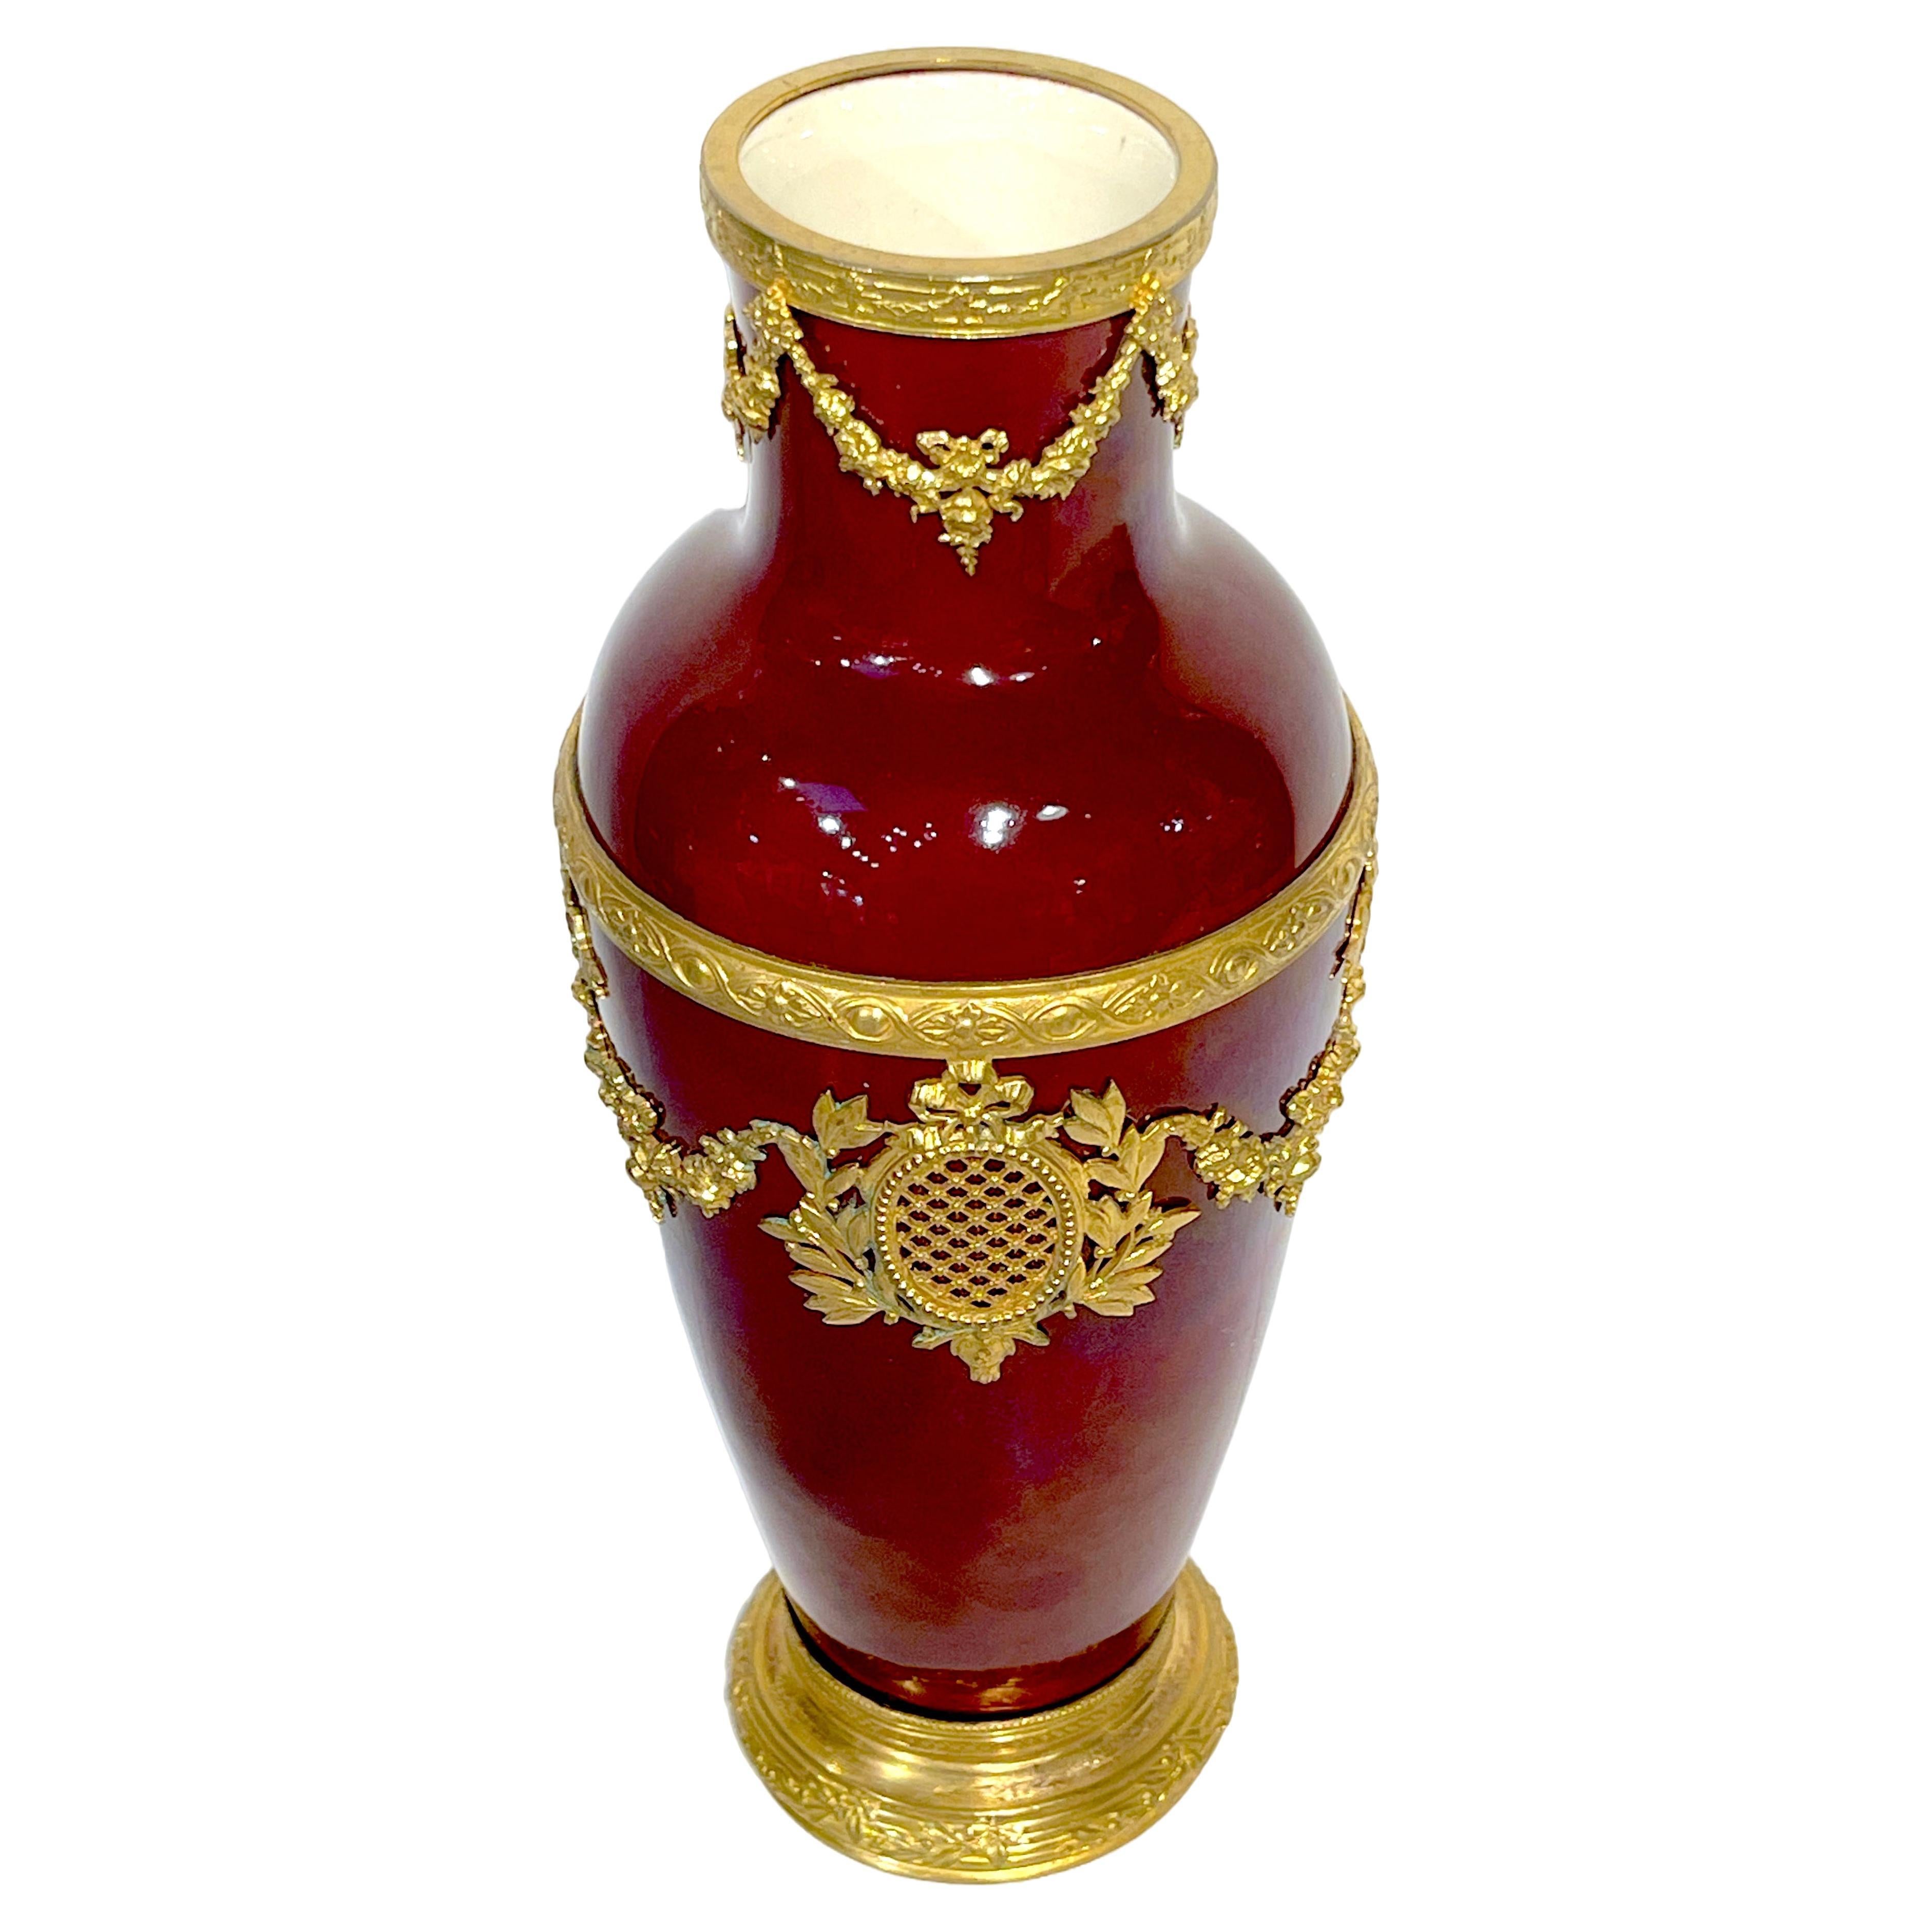 Paul Milet for Sevres Red Flambe Ormolu Mounted Neoclassical Vase 